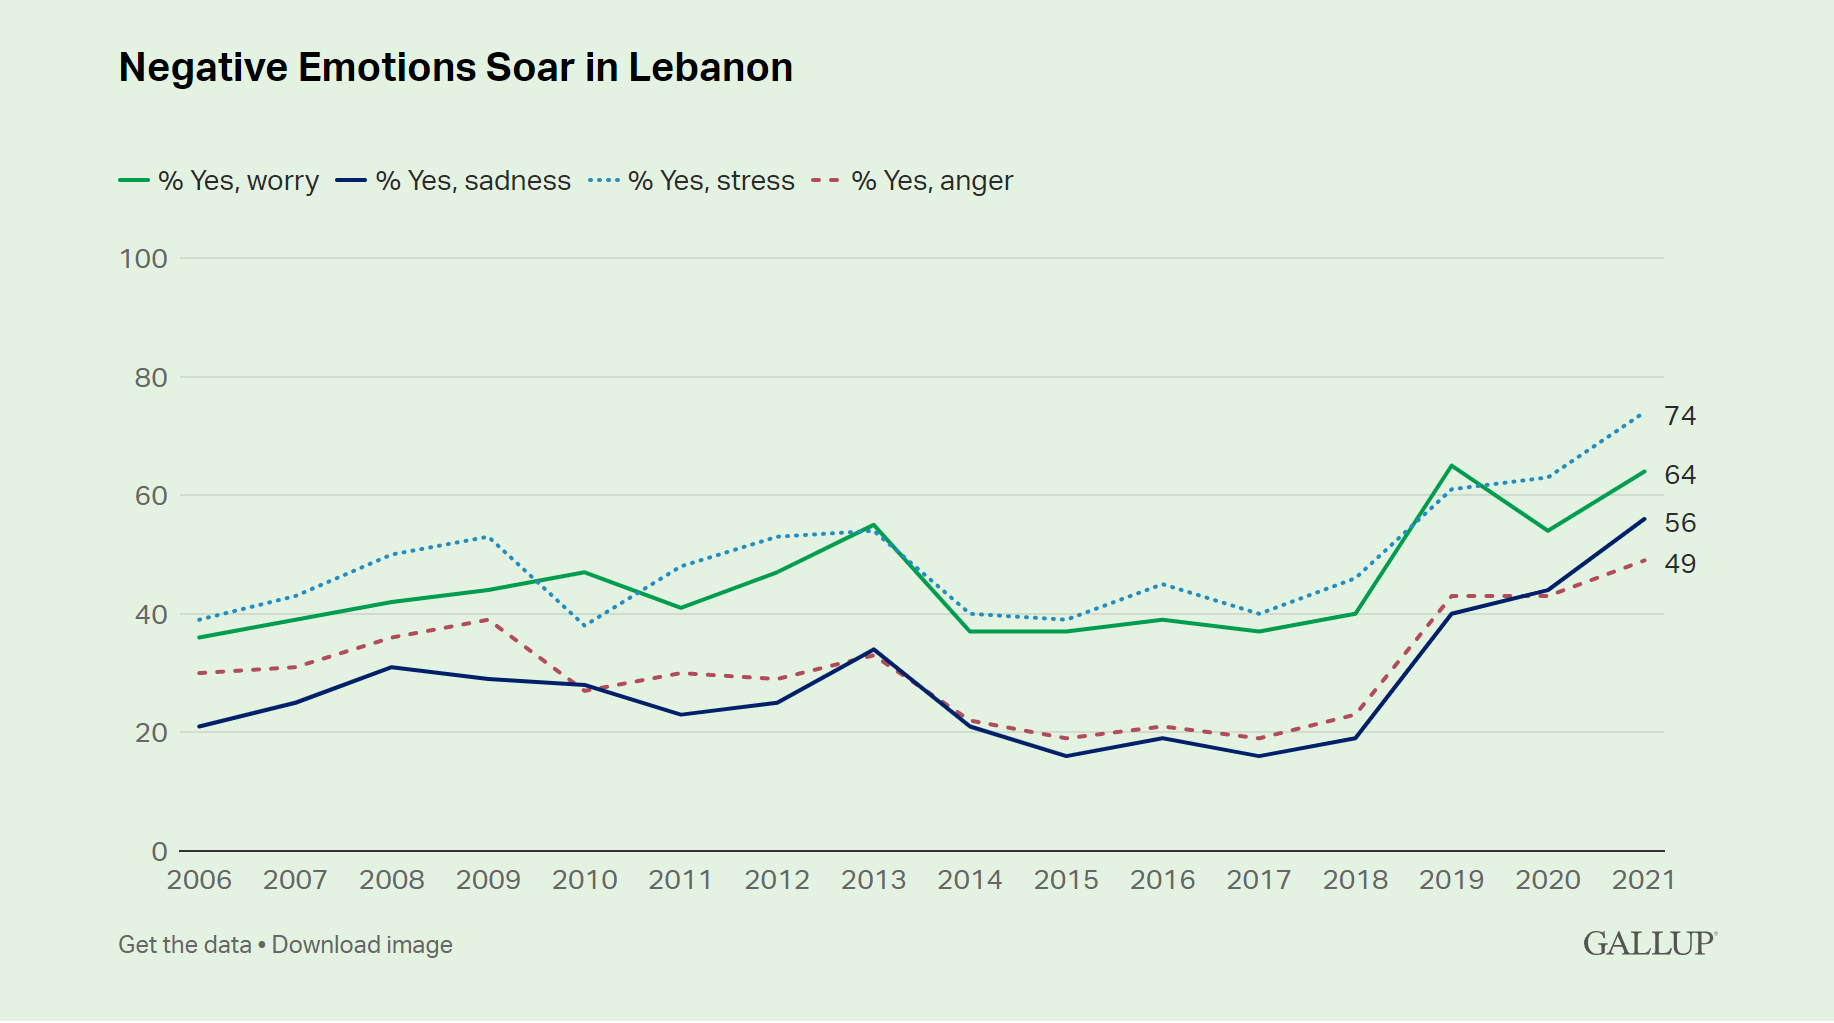 Sadness, Stress, and Worry scores for Lebanon, 2006-2021. In 2021, Sadness, Stress and Worry hit record-high Levels in Lebanon. Graphic: Gallup